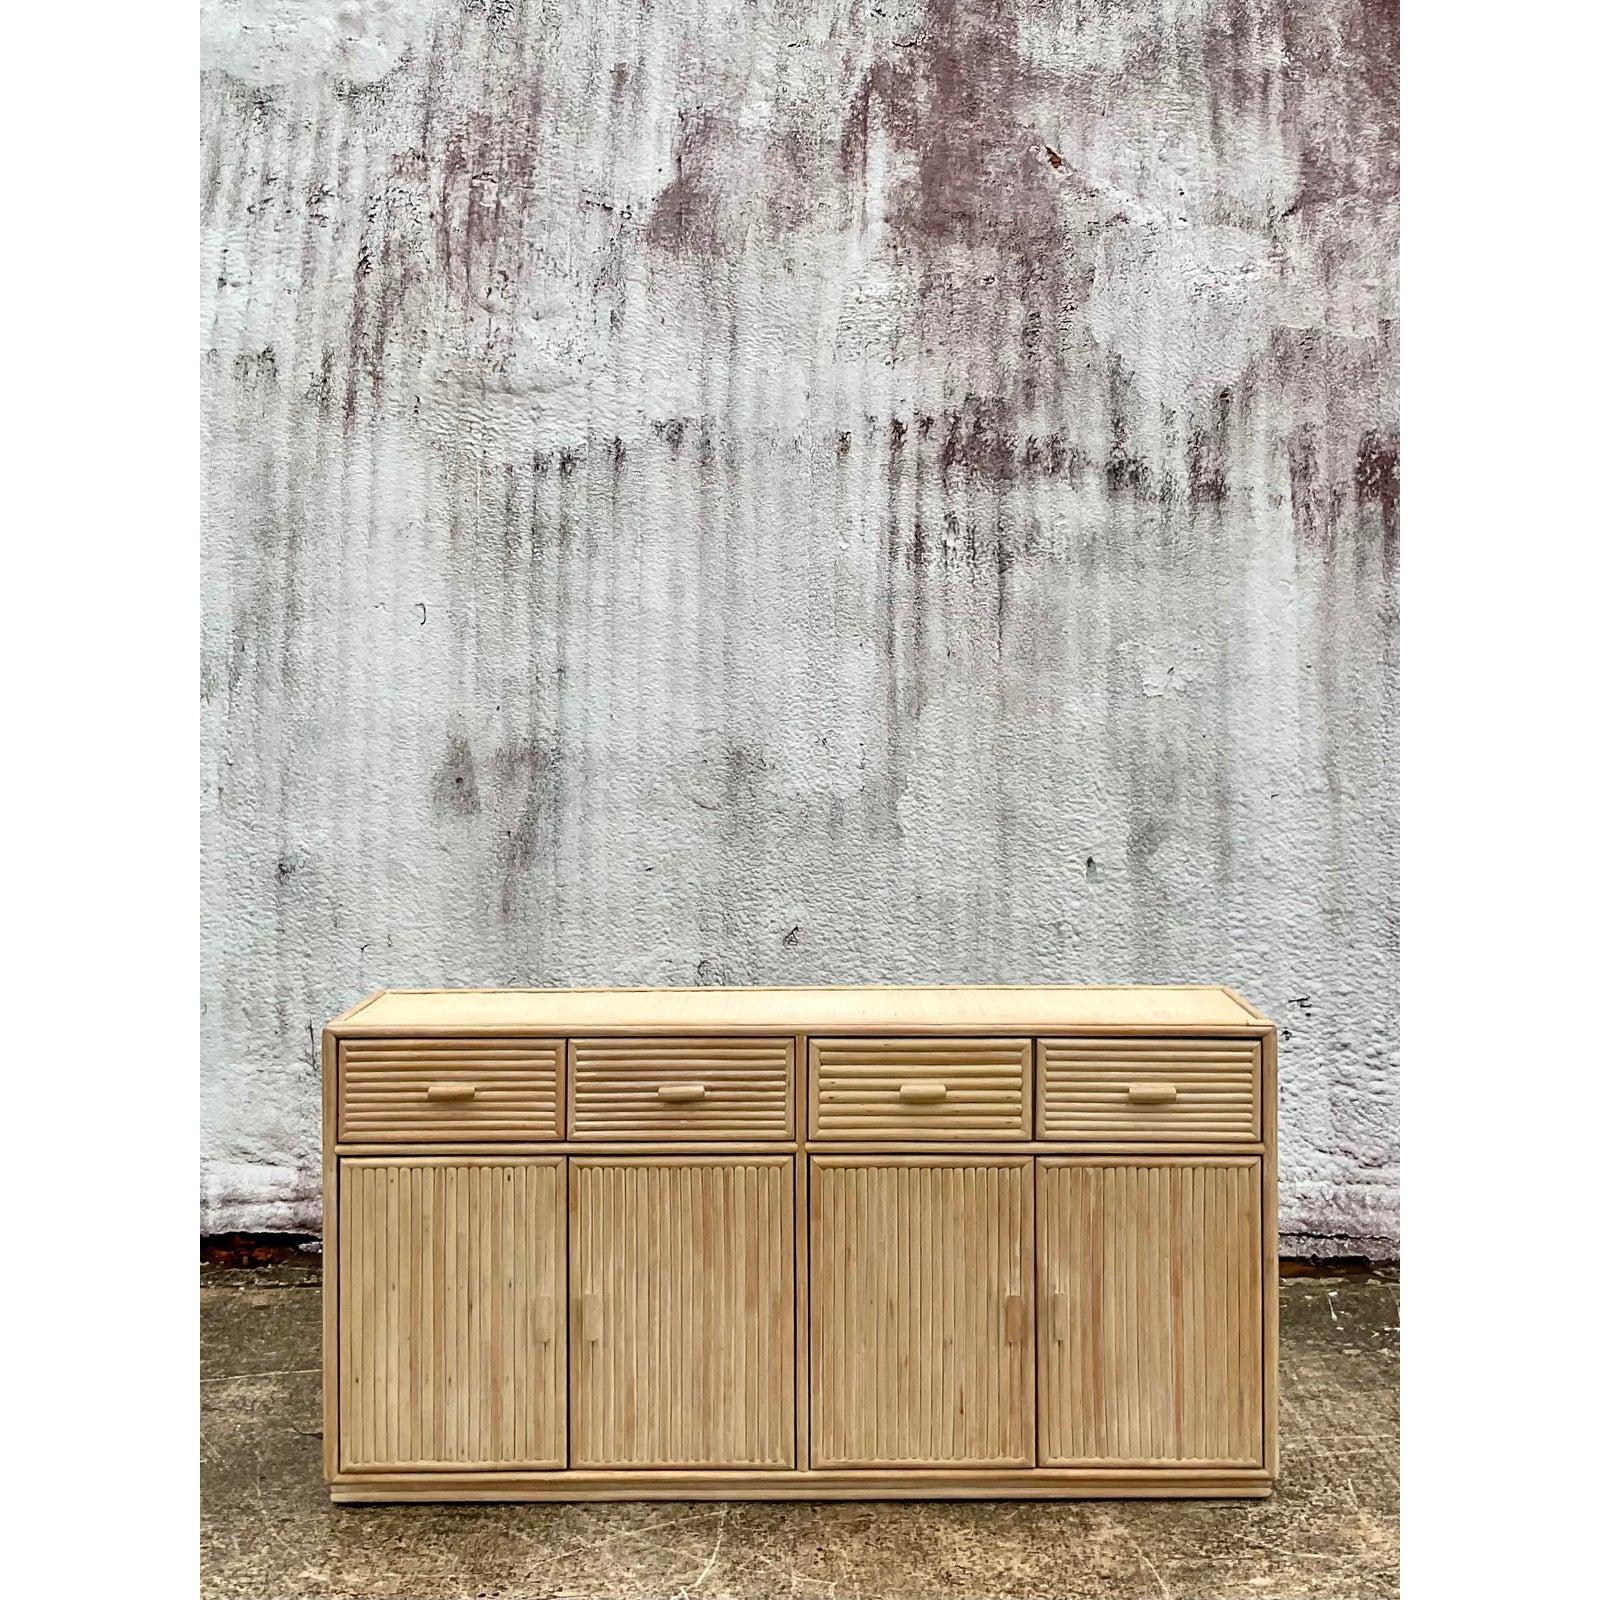 Fantastic vintage Coastal credenza. Beautiful cerused bamboo with a chic woven top. Lots of additional storage below. Tall and glamorous. Acquired from a Palm Beach estate.